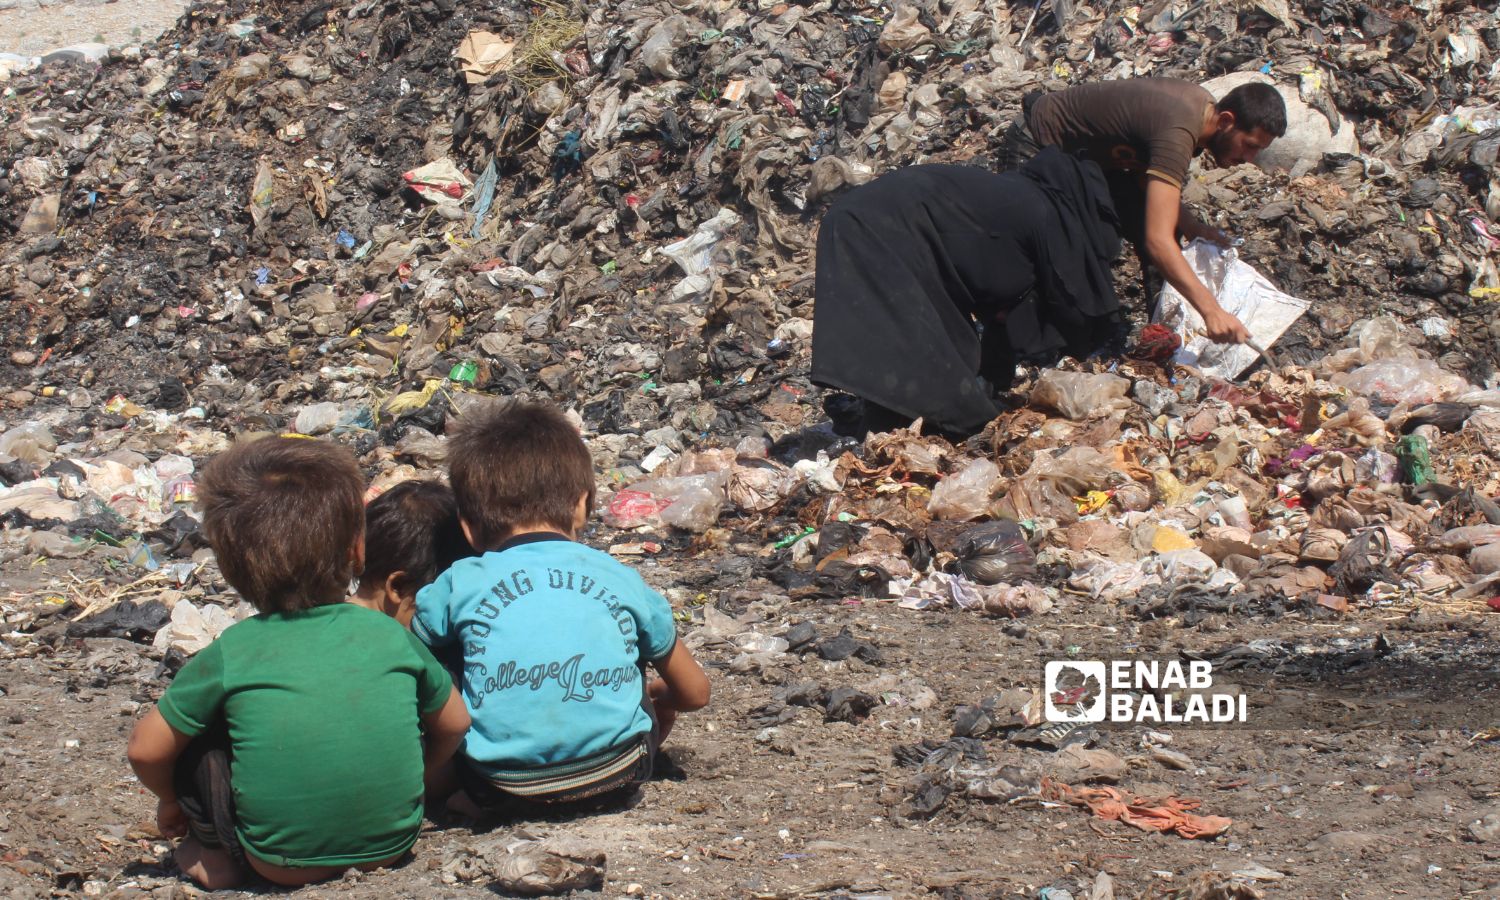 A family collecting scraps from a garbage dump near the town of Qah on the Syrian-Turkish border - August 1, 2020 (Enab Baladi)